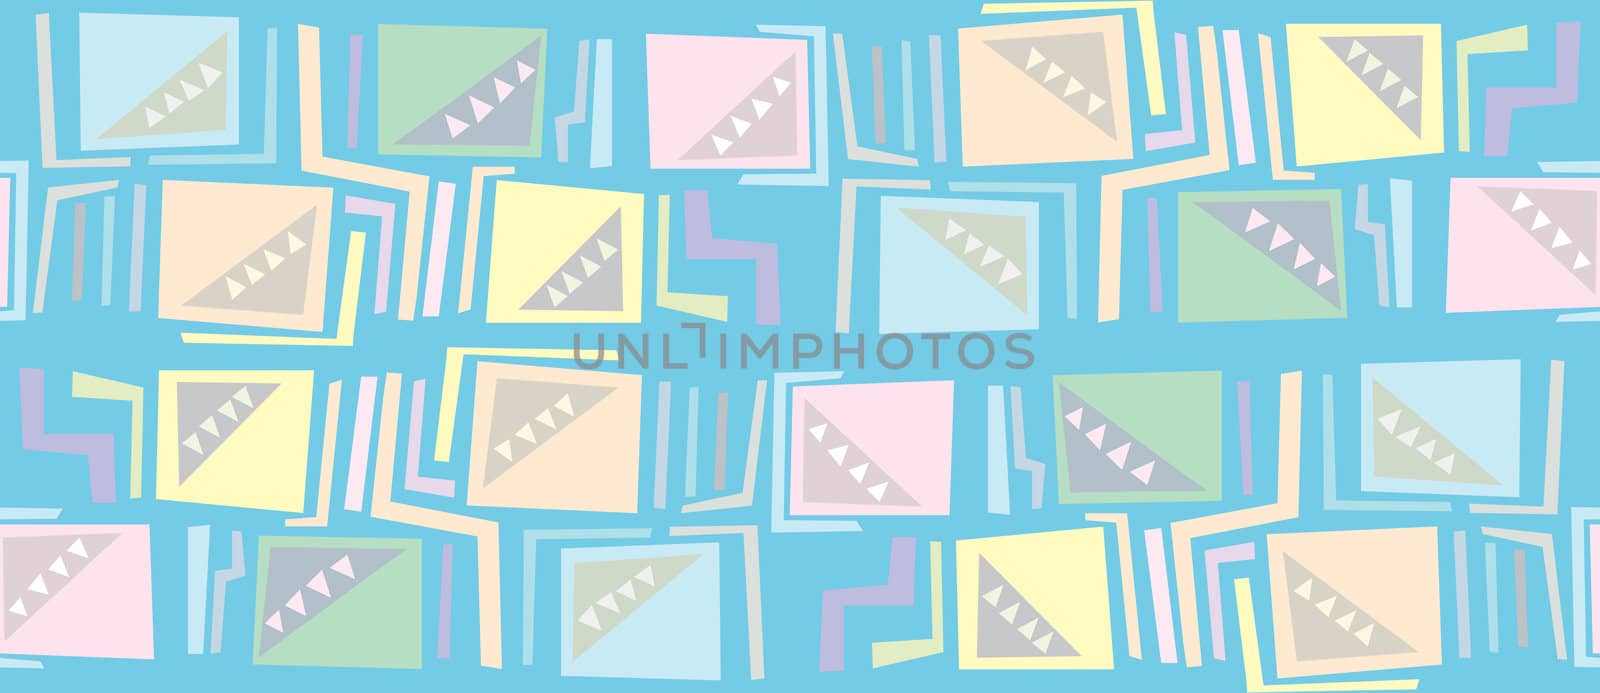 Seamless background pattern of squares, right angles and triangles